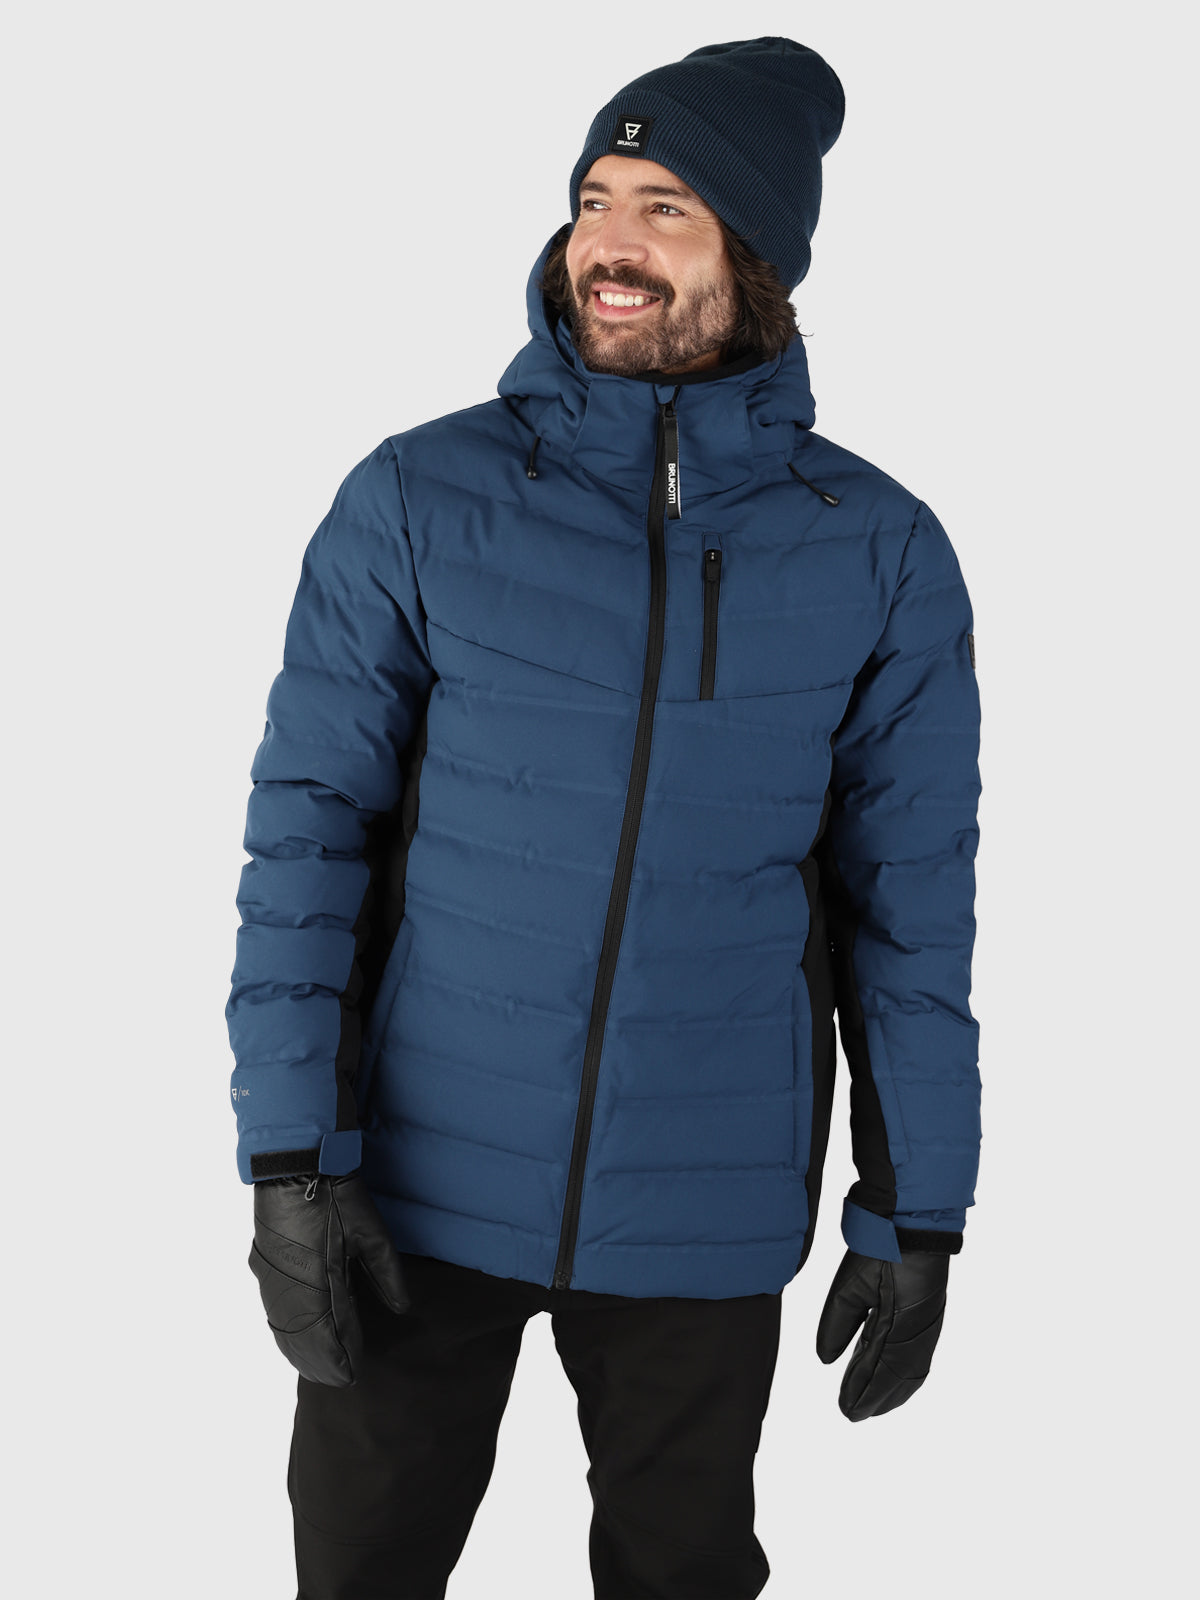 Winter Sports Clothing & Accessories